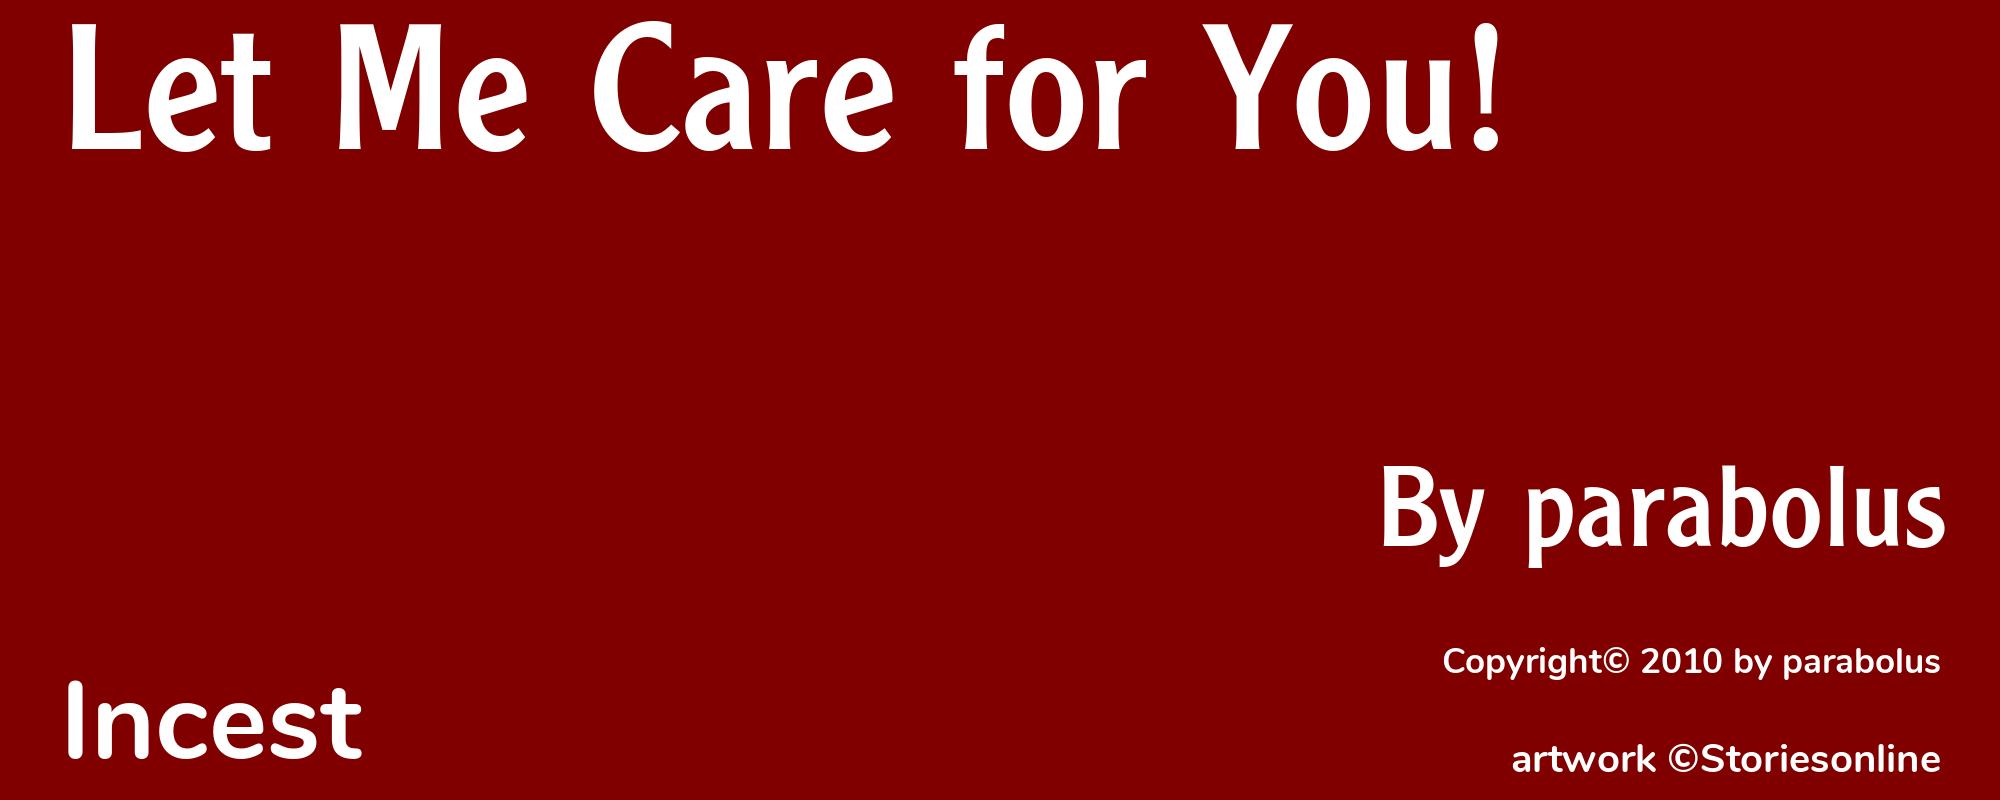 Let Me Care for You! - Cover